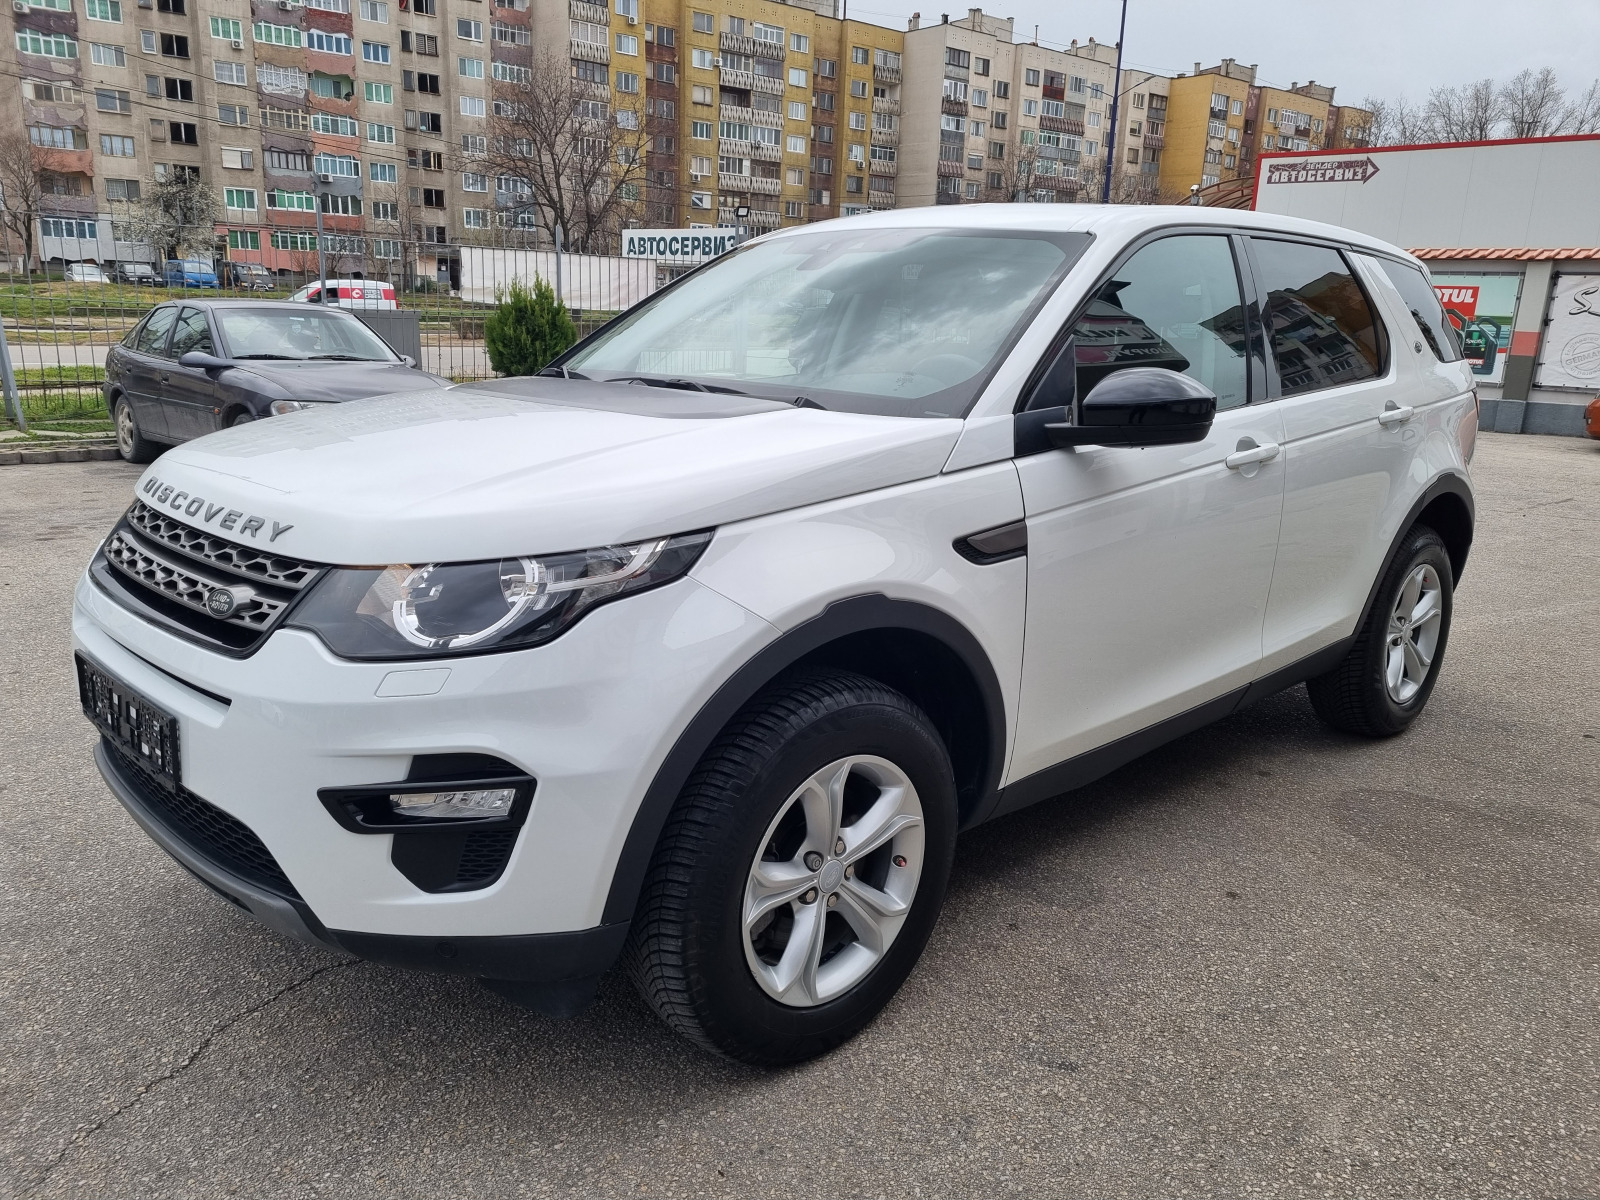 Land Rover Discovery Sport 2.0i-AT (240hp) 4WD - изображение 1